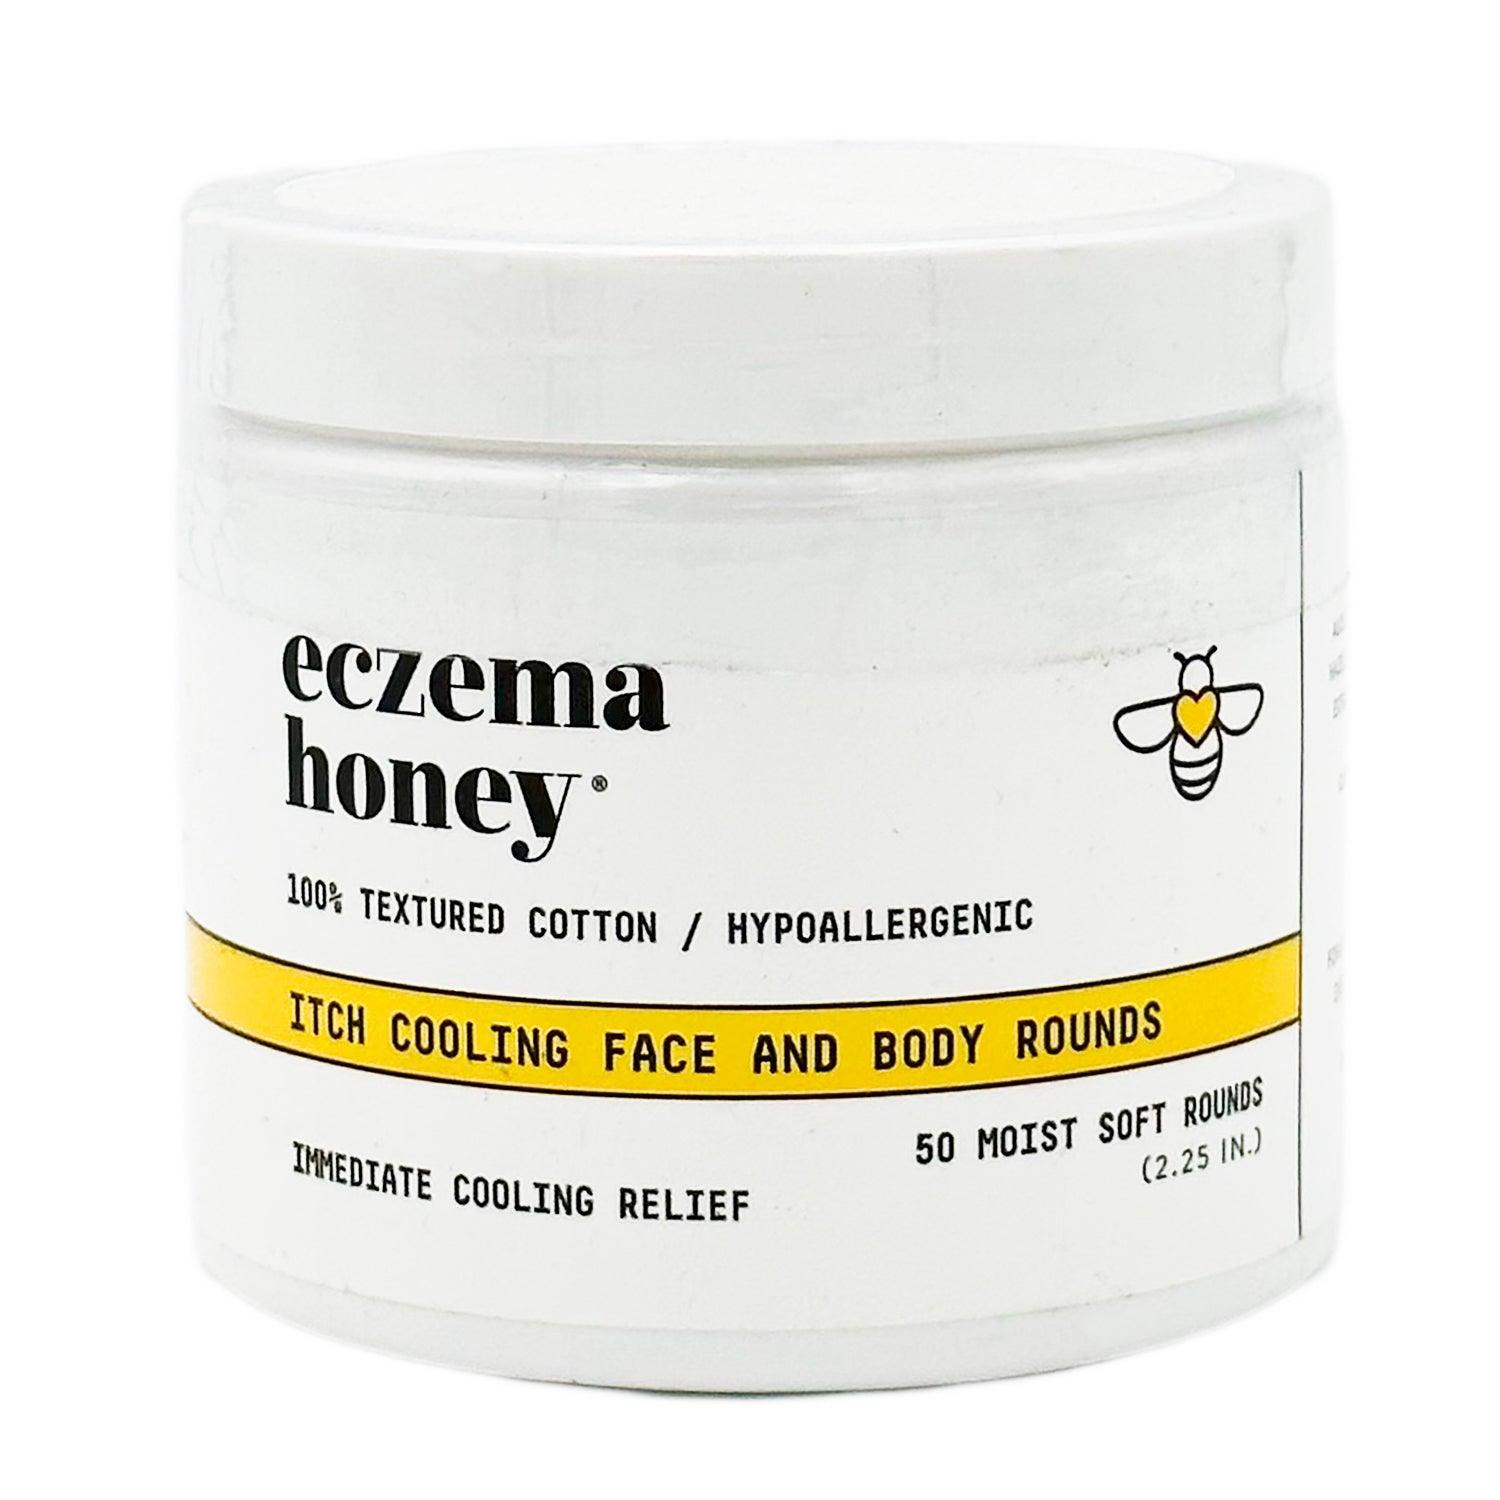 Eczema Honey Itch Cooling Face & Body Moist Cotton Rounds Hypoallergenic 50 Ct. - Home Revival Shop